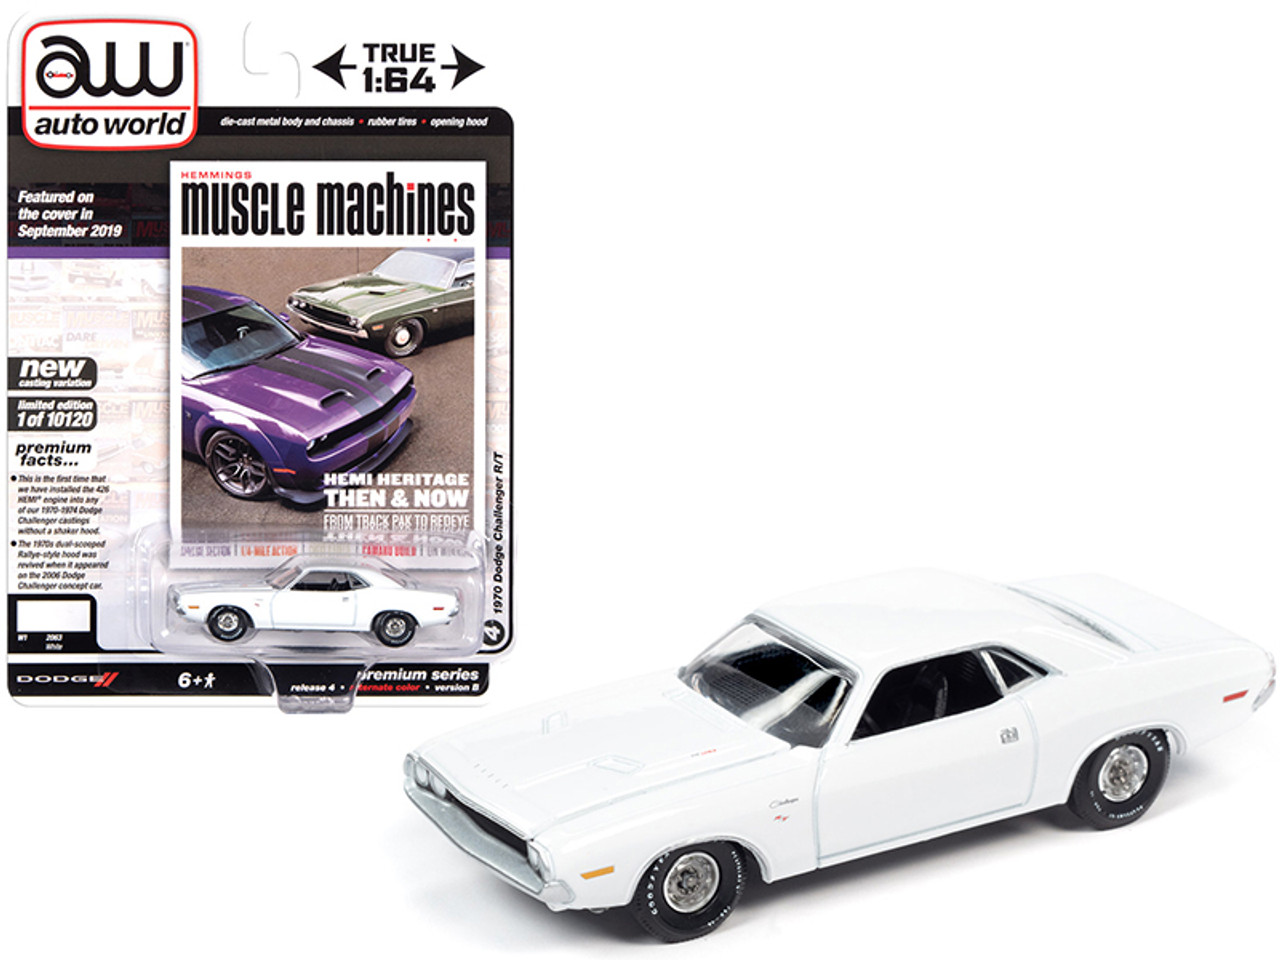 1970 Dodge Challenger R/T White "Hemmings Muscle Machines" Magazine Cover Car (September 2019) Limited Edition to 10120 pieces Worldwide 1/64 Diecast Model Car by Autoworld